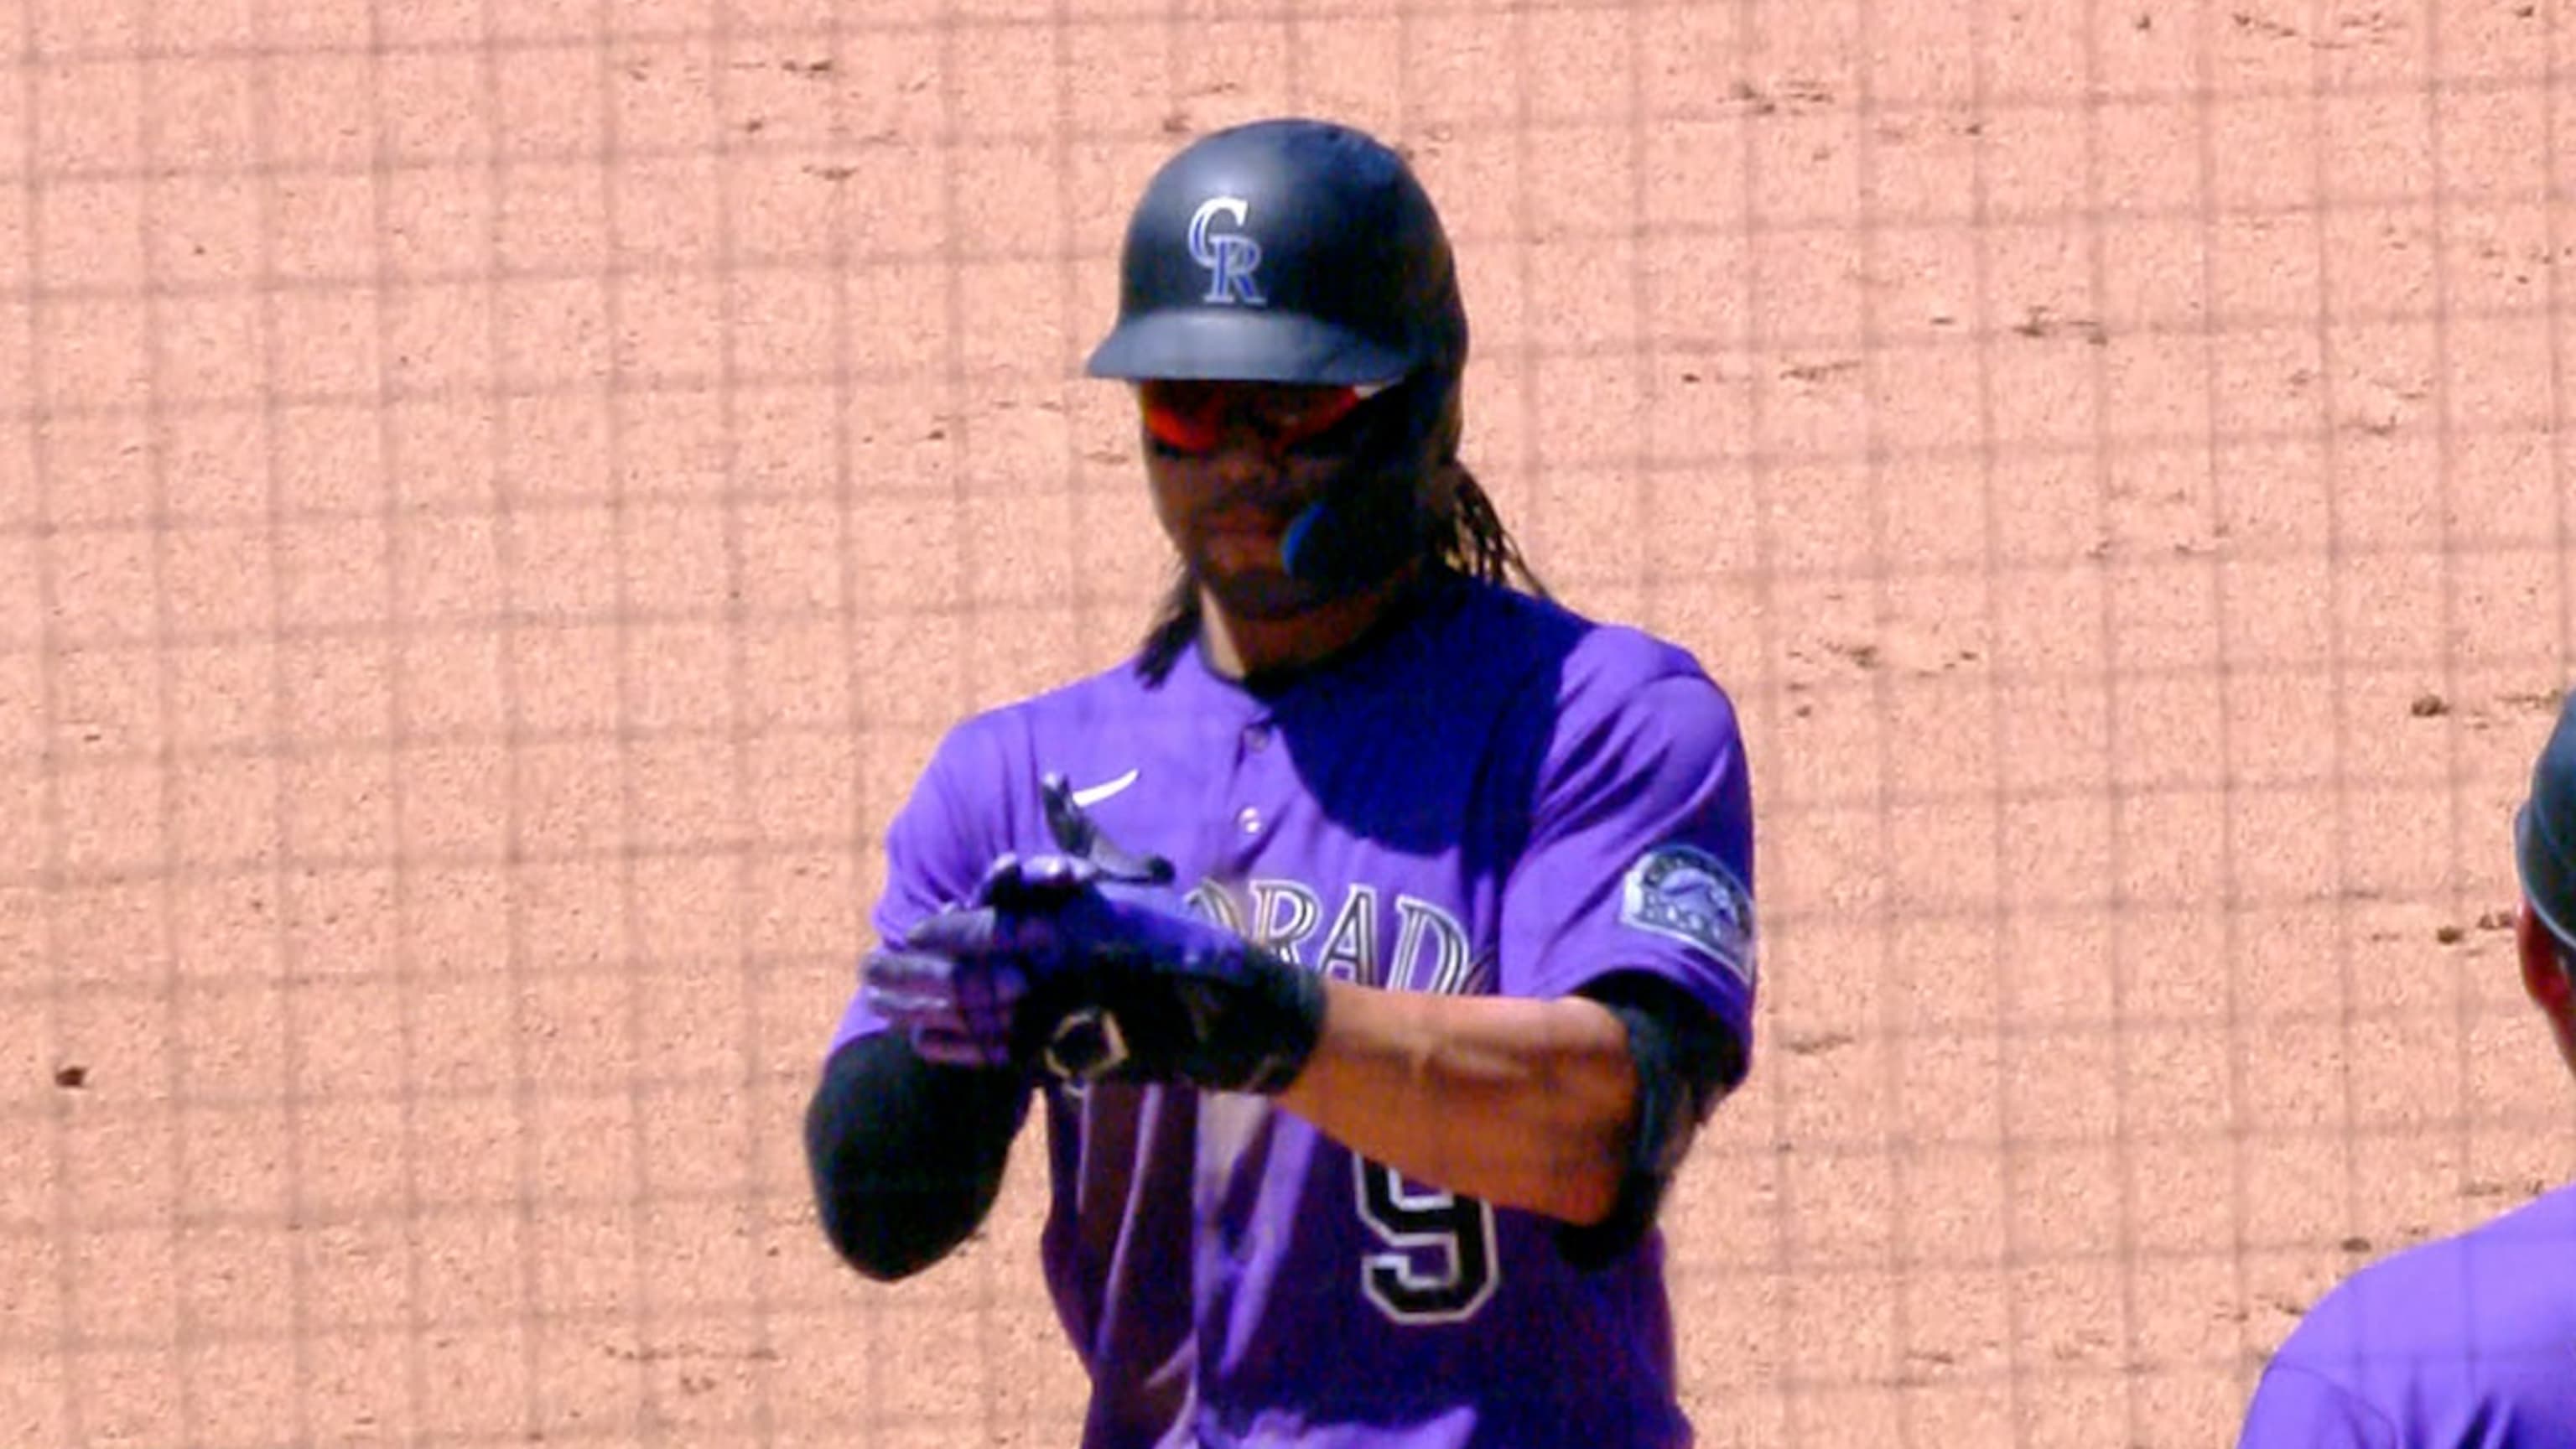 Connor Joe, Colorado, Colorado Rockies, What a month it's been for the  Colorado Rockies' Connor Joe (.349/.451/.605). The success is allowing Joe  to become a role model for both Asian